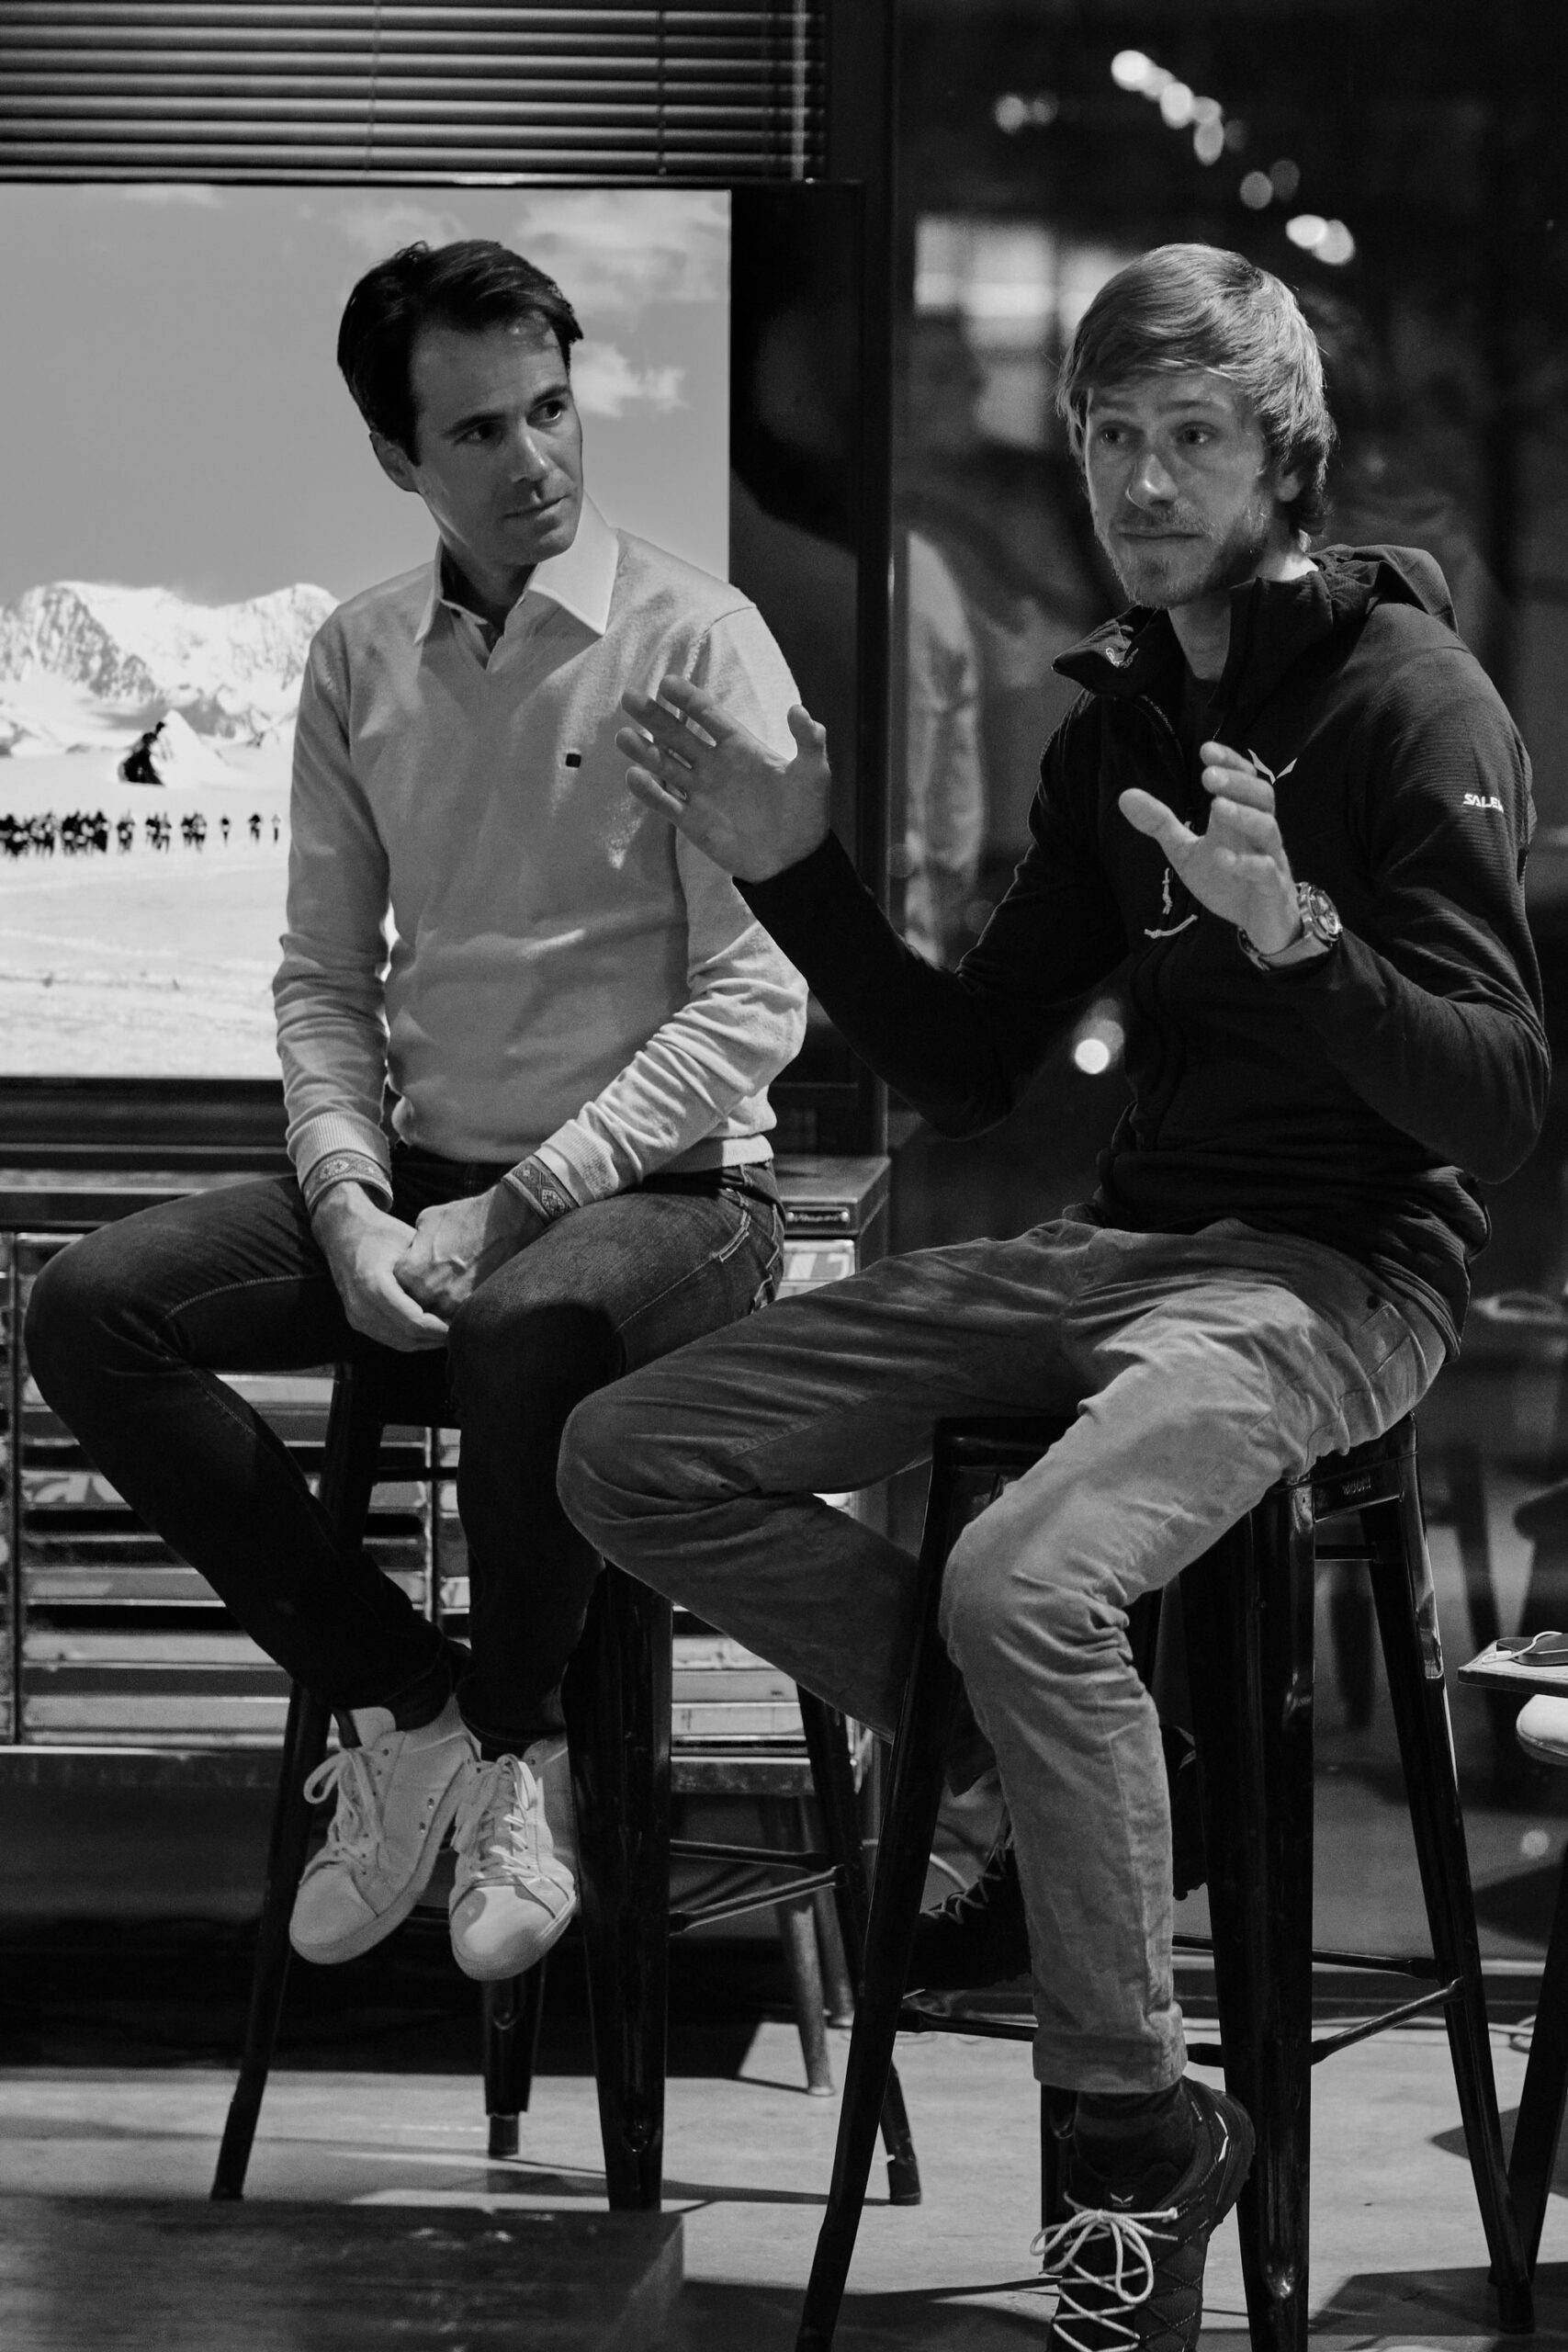 Laurent Lecamp (left) and Simon Messner at the Classic Car Club Manhattan speaking about having just returned from the Antartic Ice Marathon (Image: Troy Barmore)